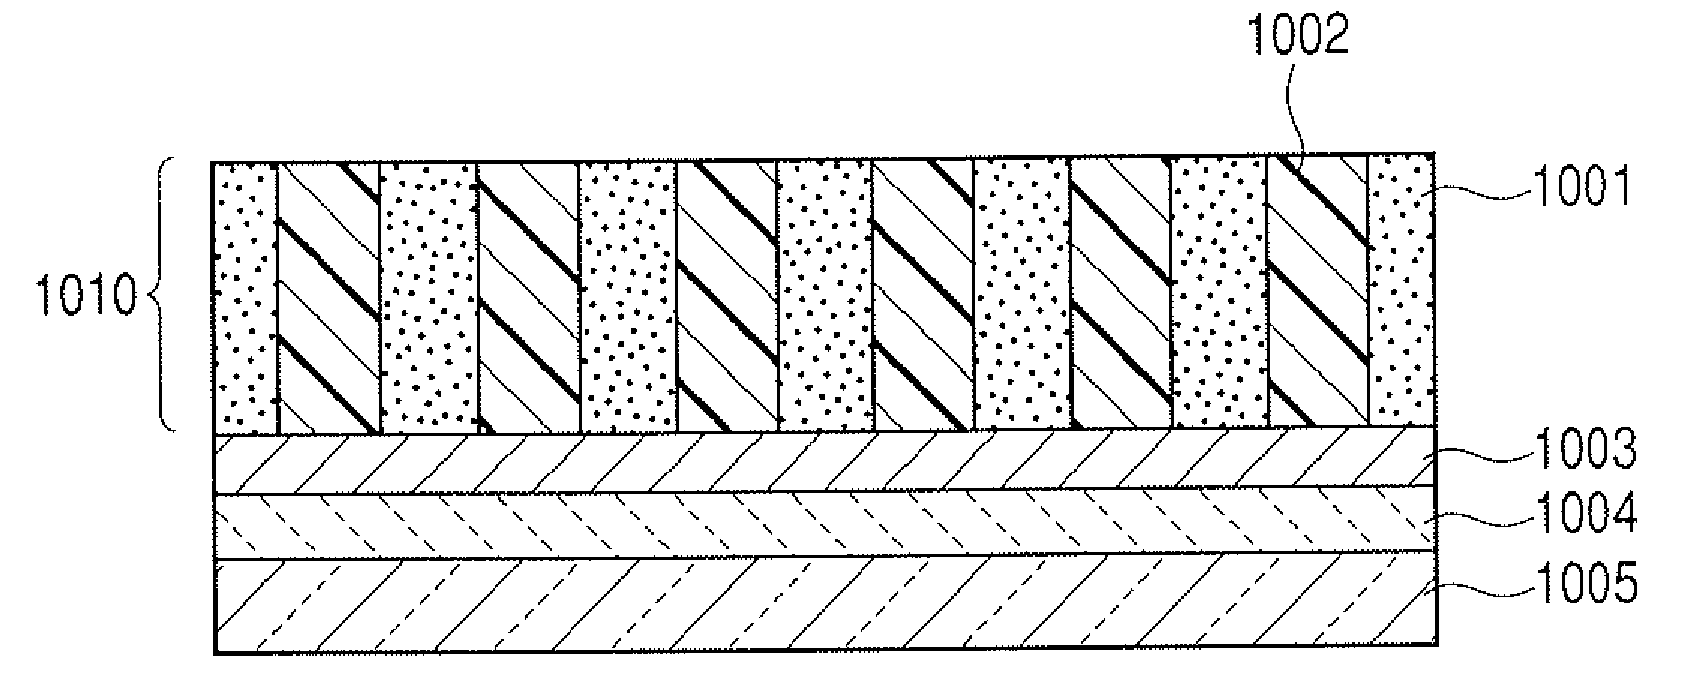 Structure and process for production thereof